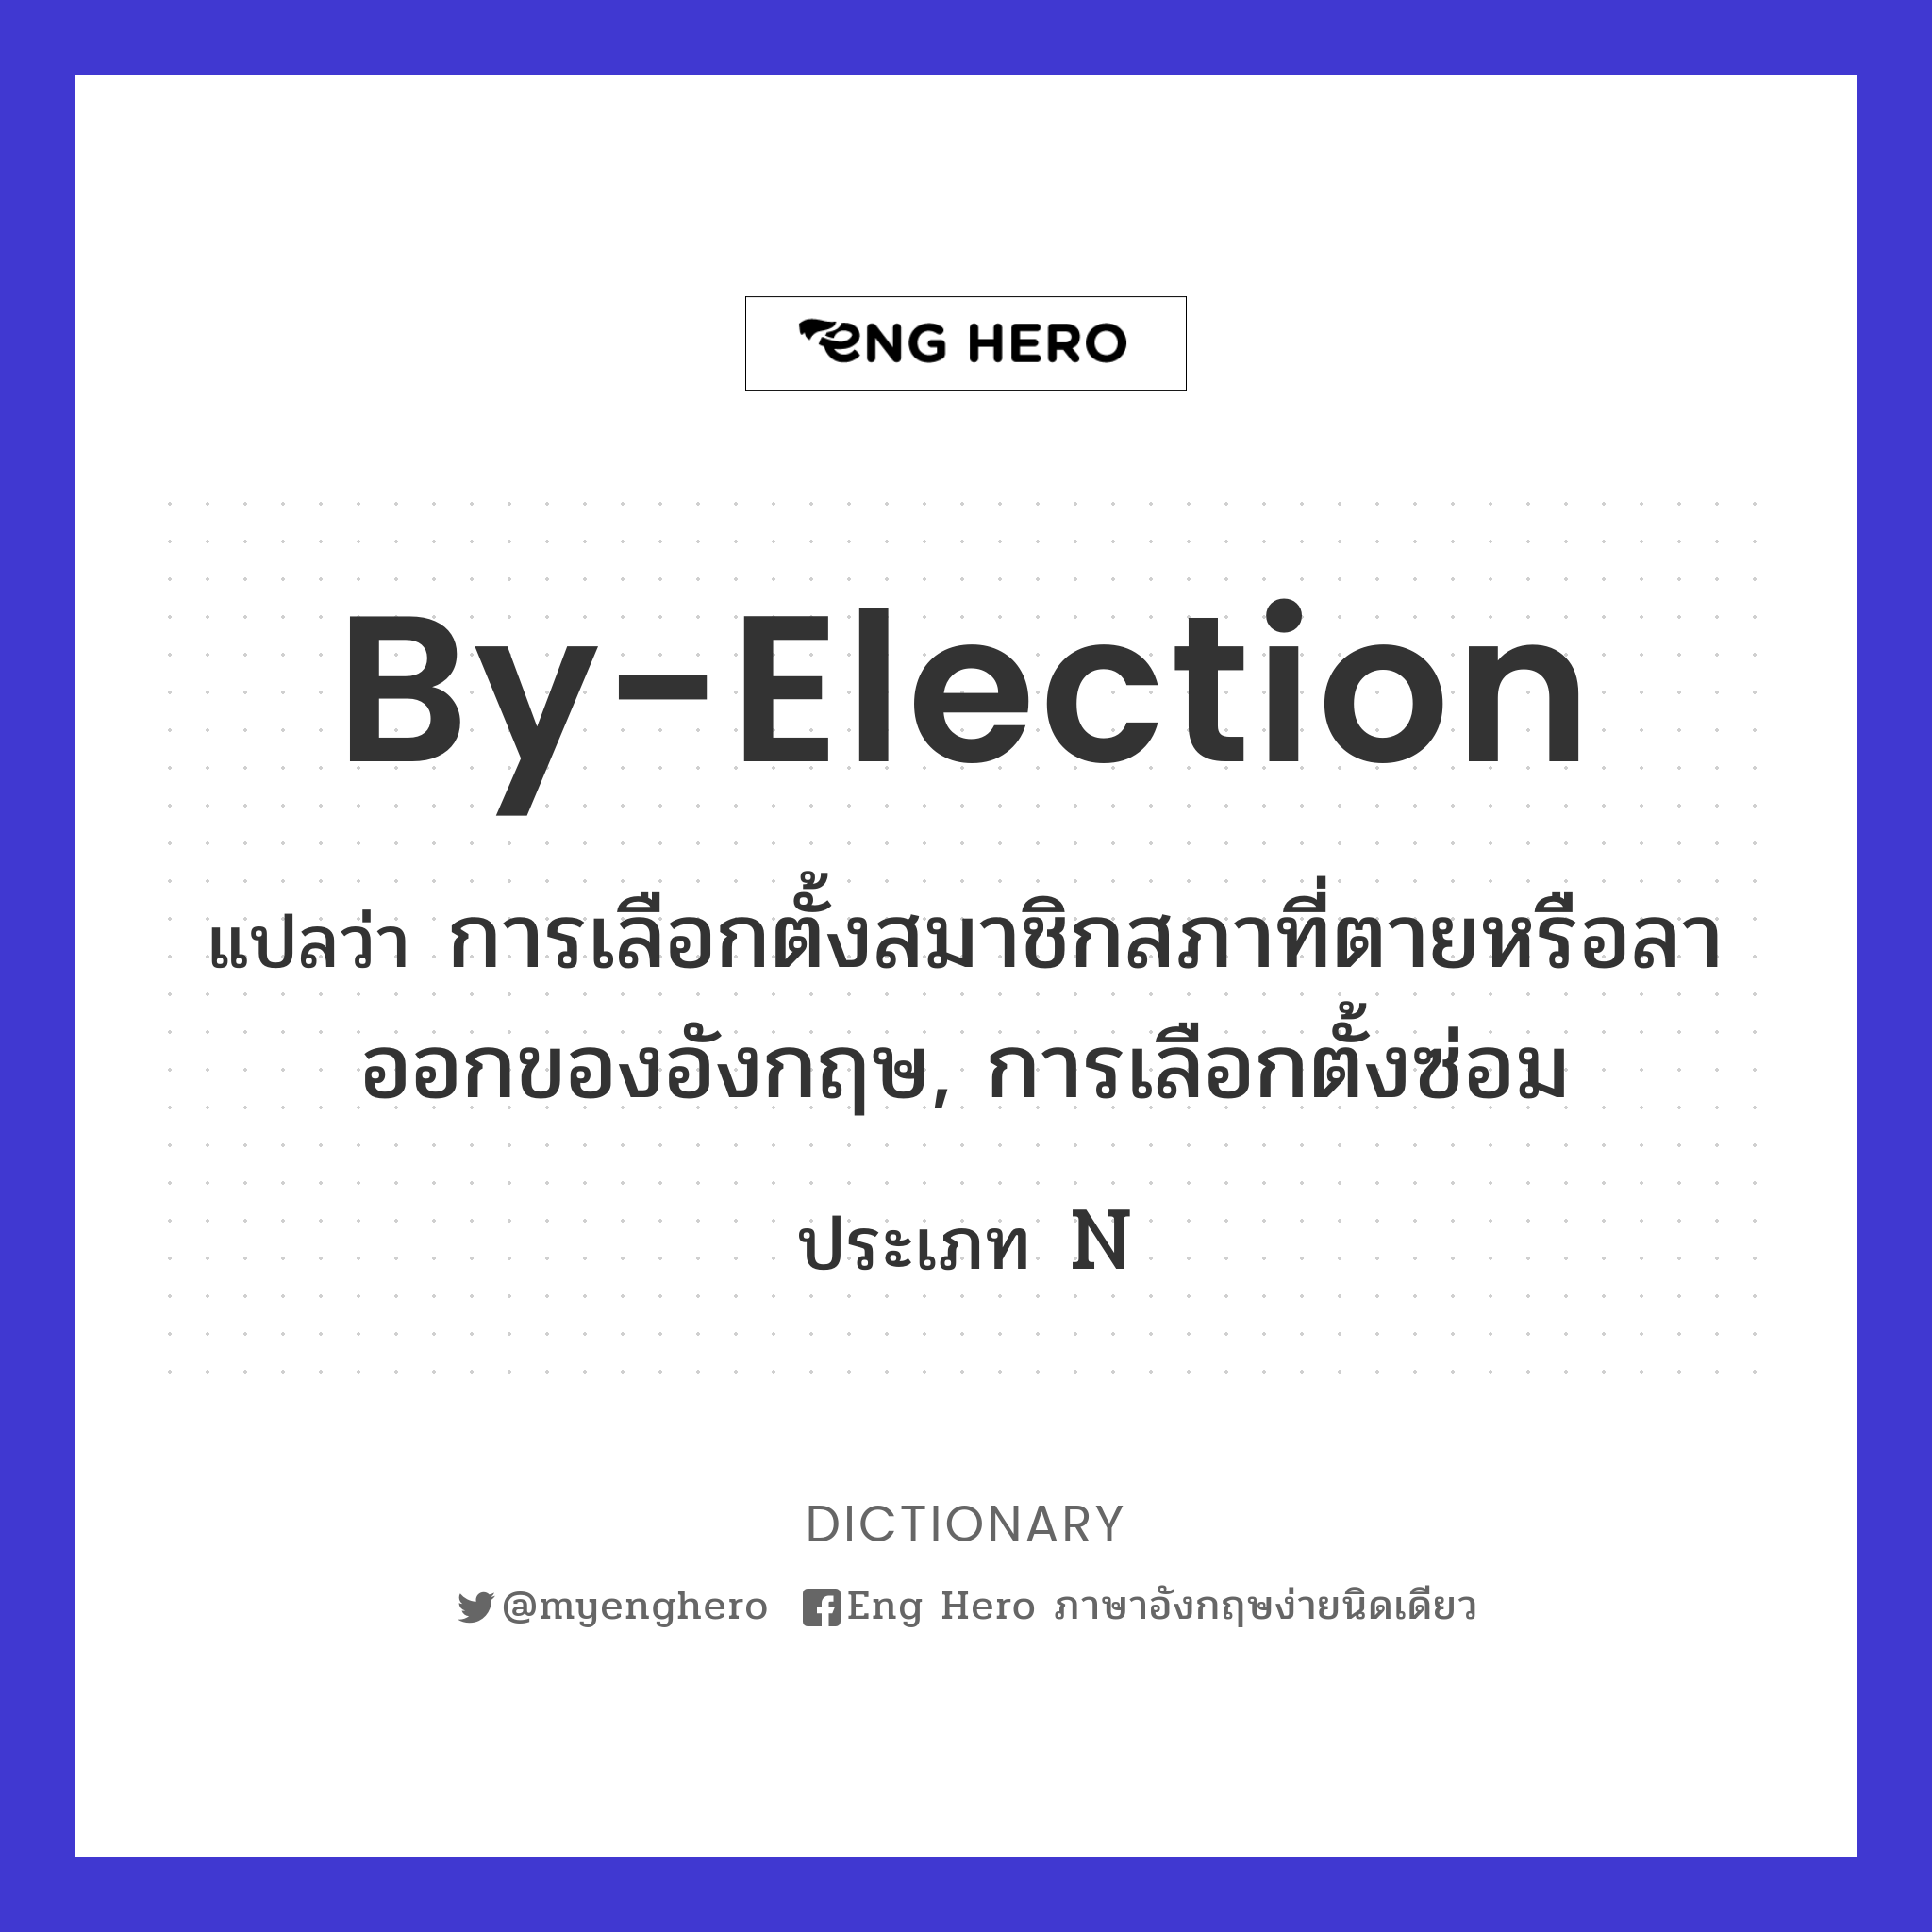 by-election